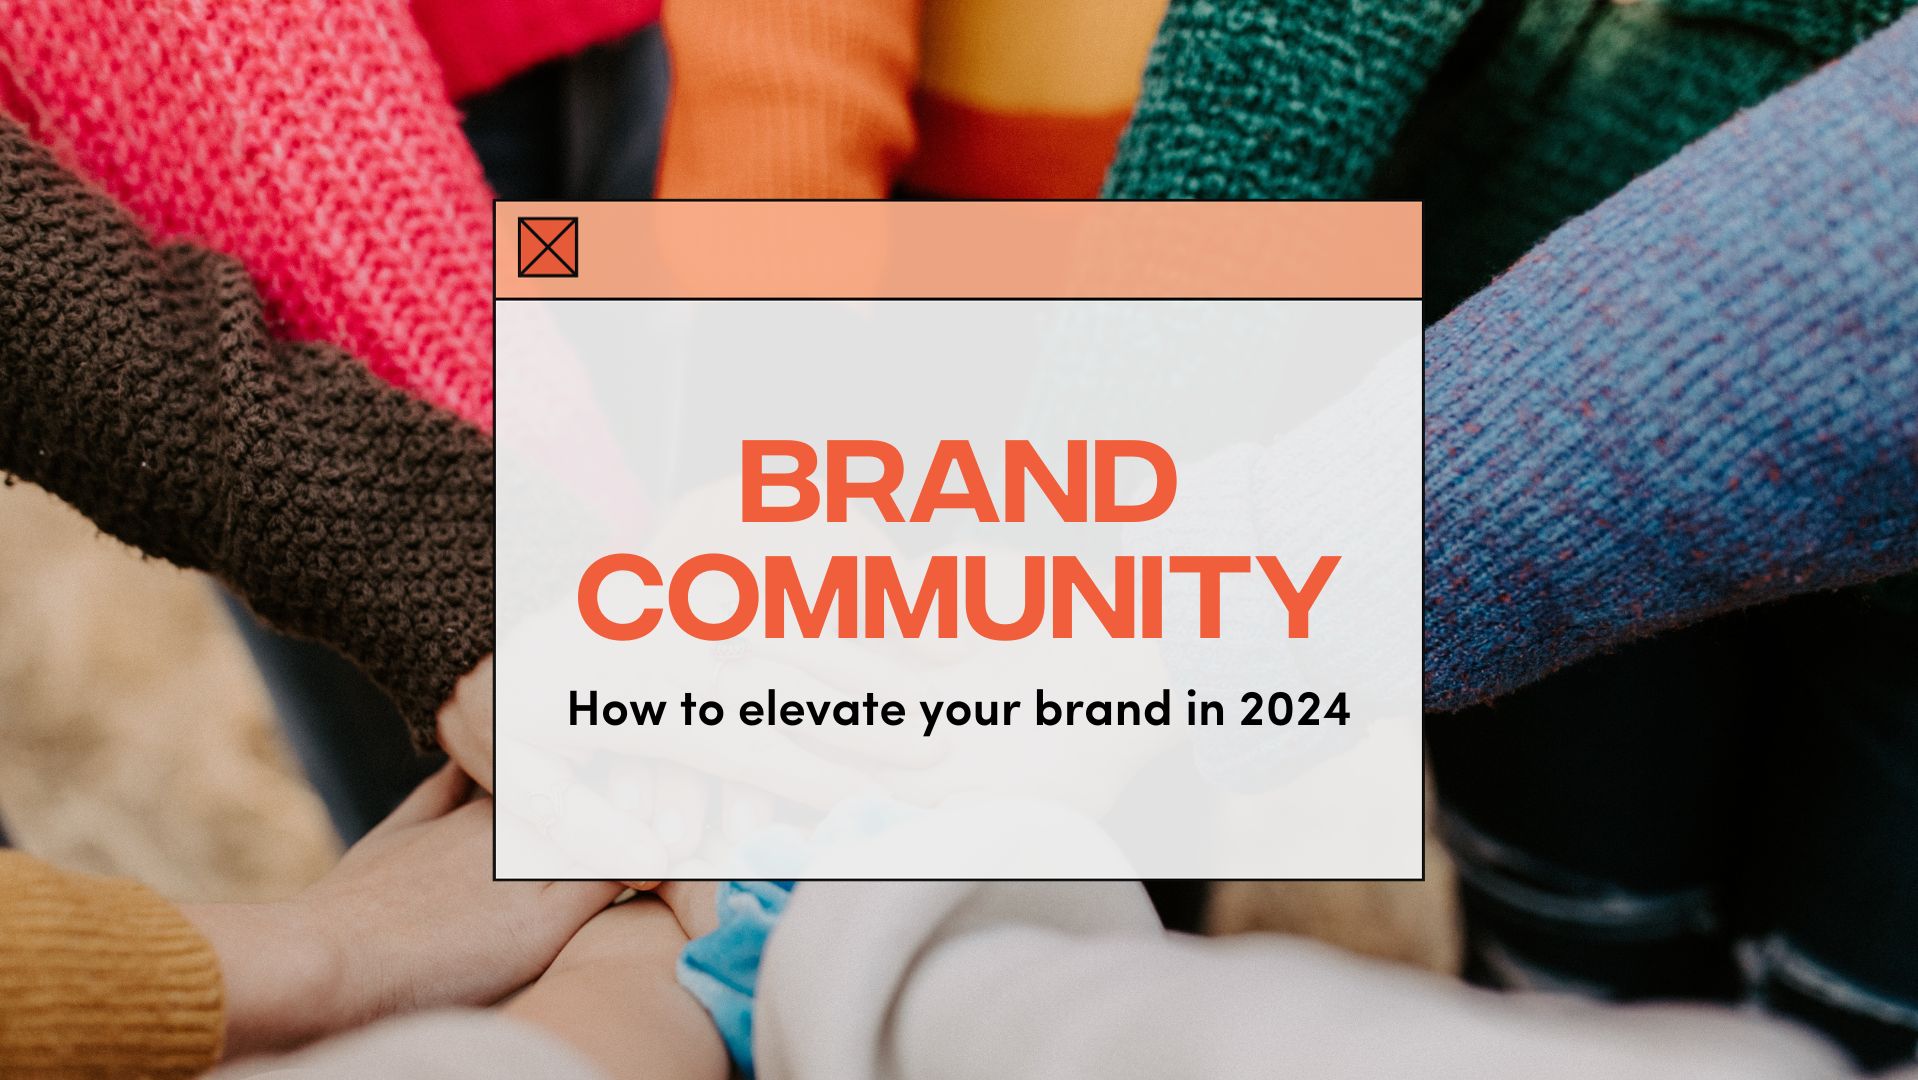 Brand Community - How to elevate your brand in 2024